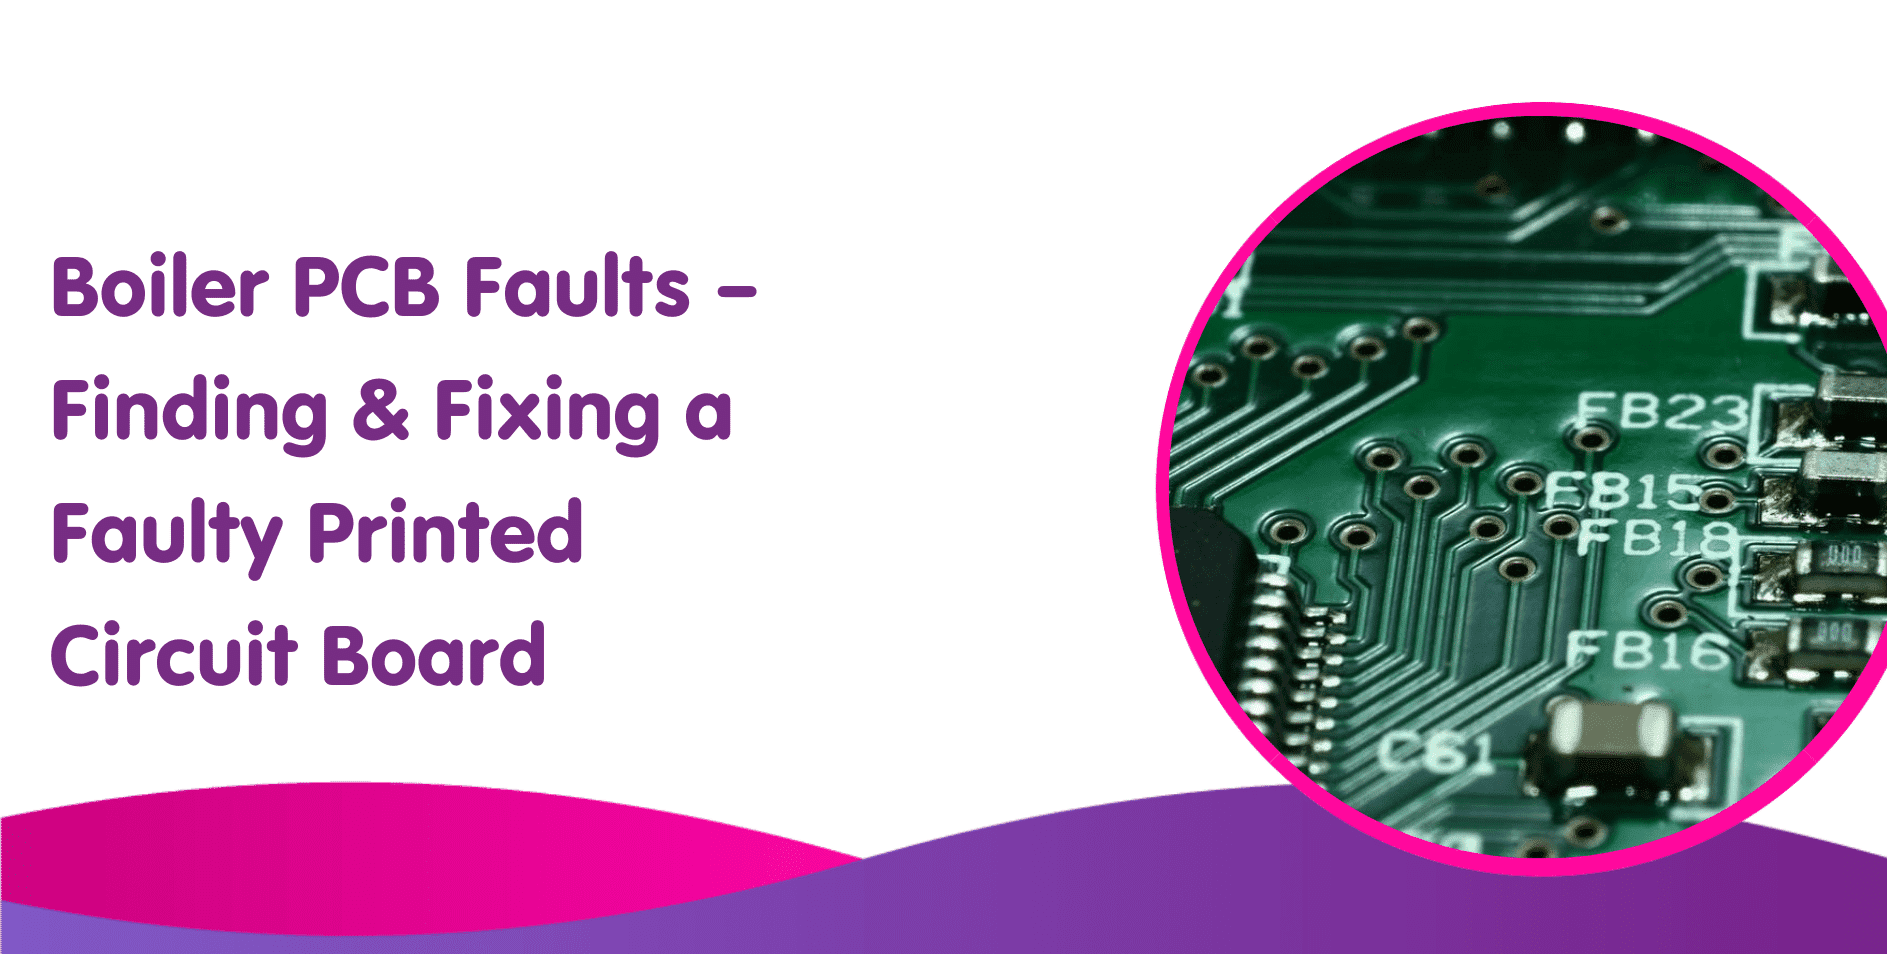 Boiler PCB Faults – Finding & Fixing a Faulty Printed Circuit Board